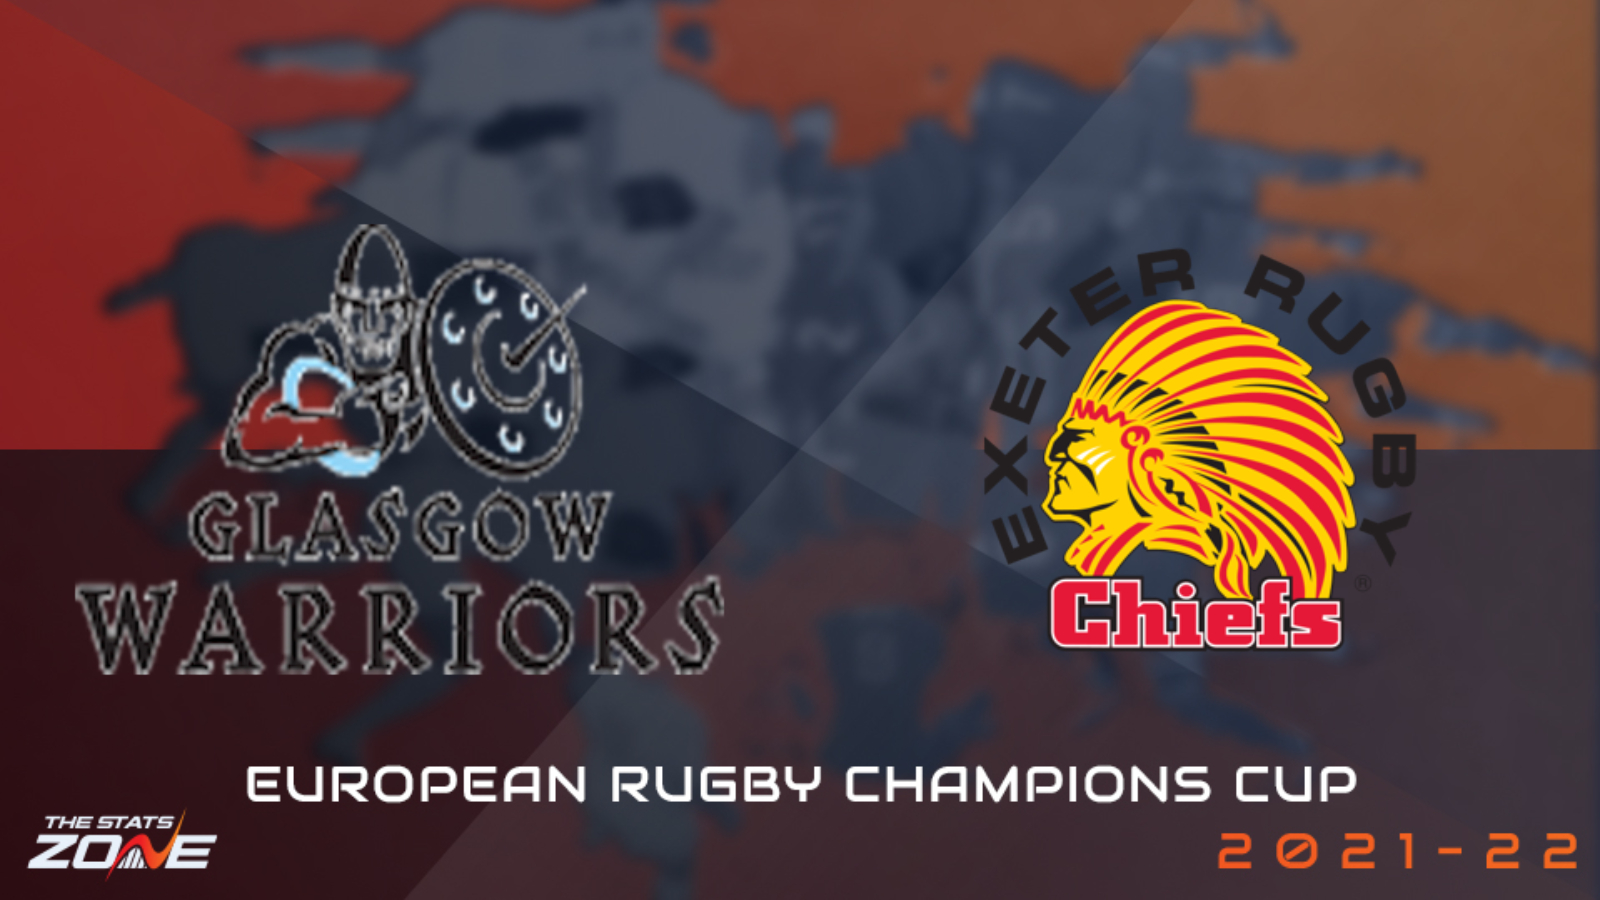 Glasgow Warriors vs Exeter Chiefs Preview and Prediction